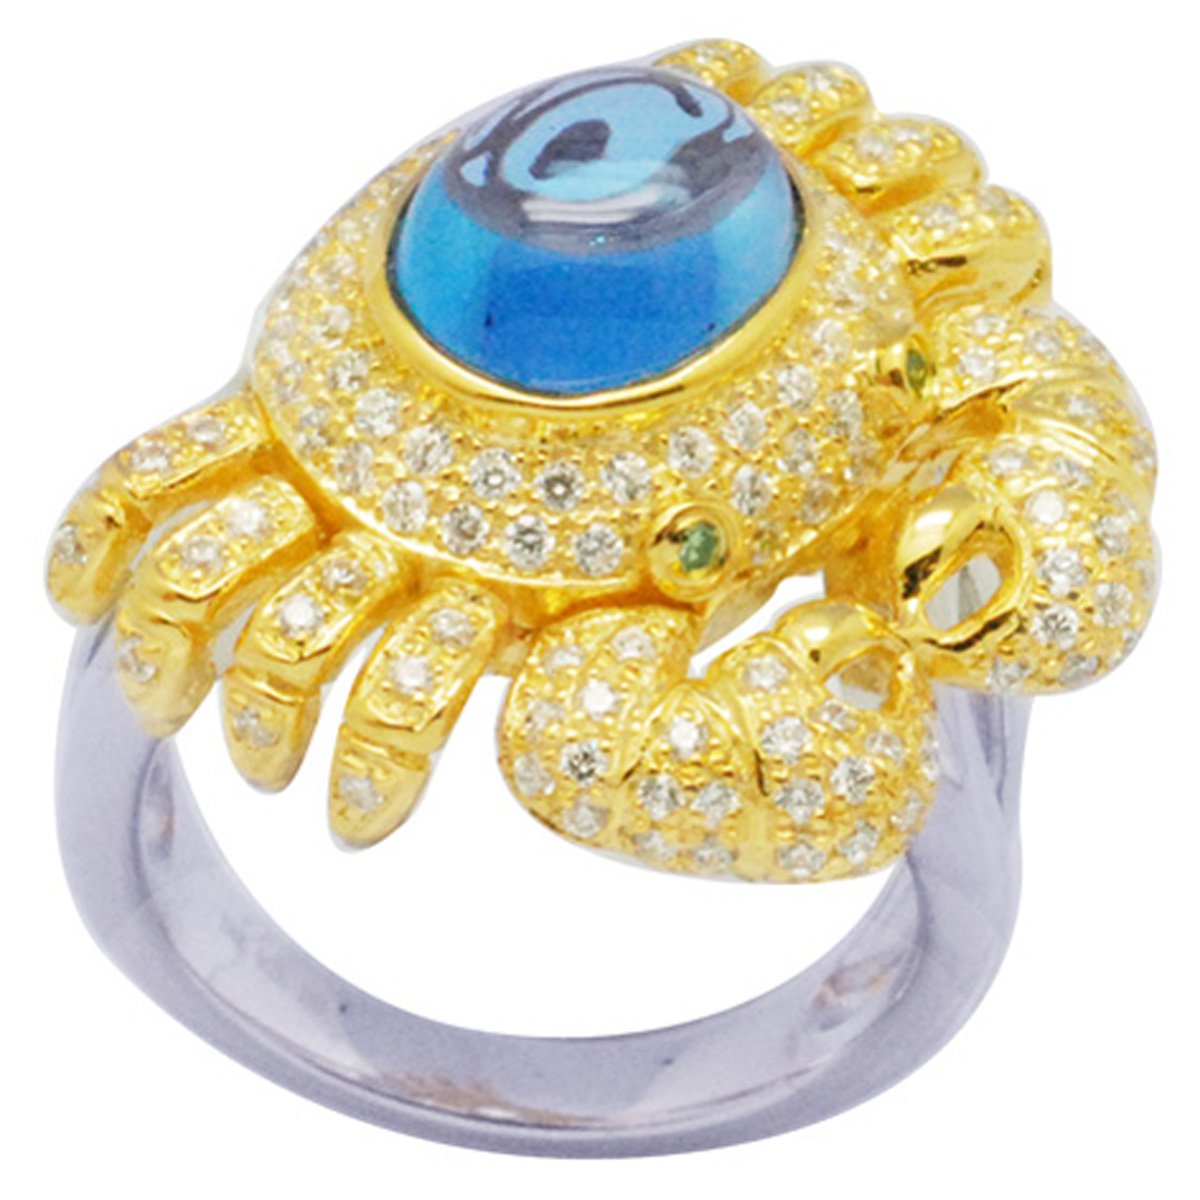 De Buman 18k Gold and Sterling Silver Genuine Swiss Blue Topaz and Cubic Zirconia Crab Ring, Size 7